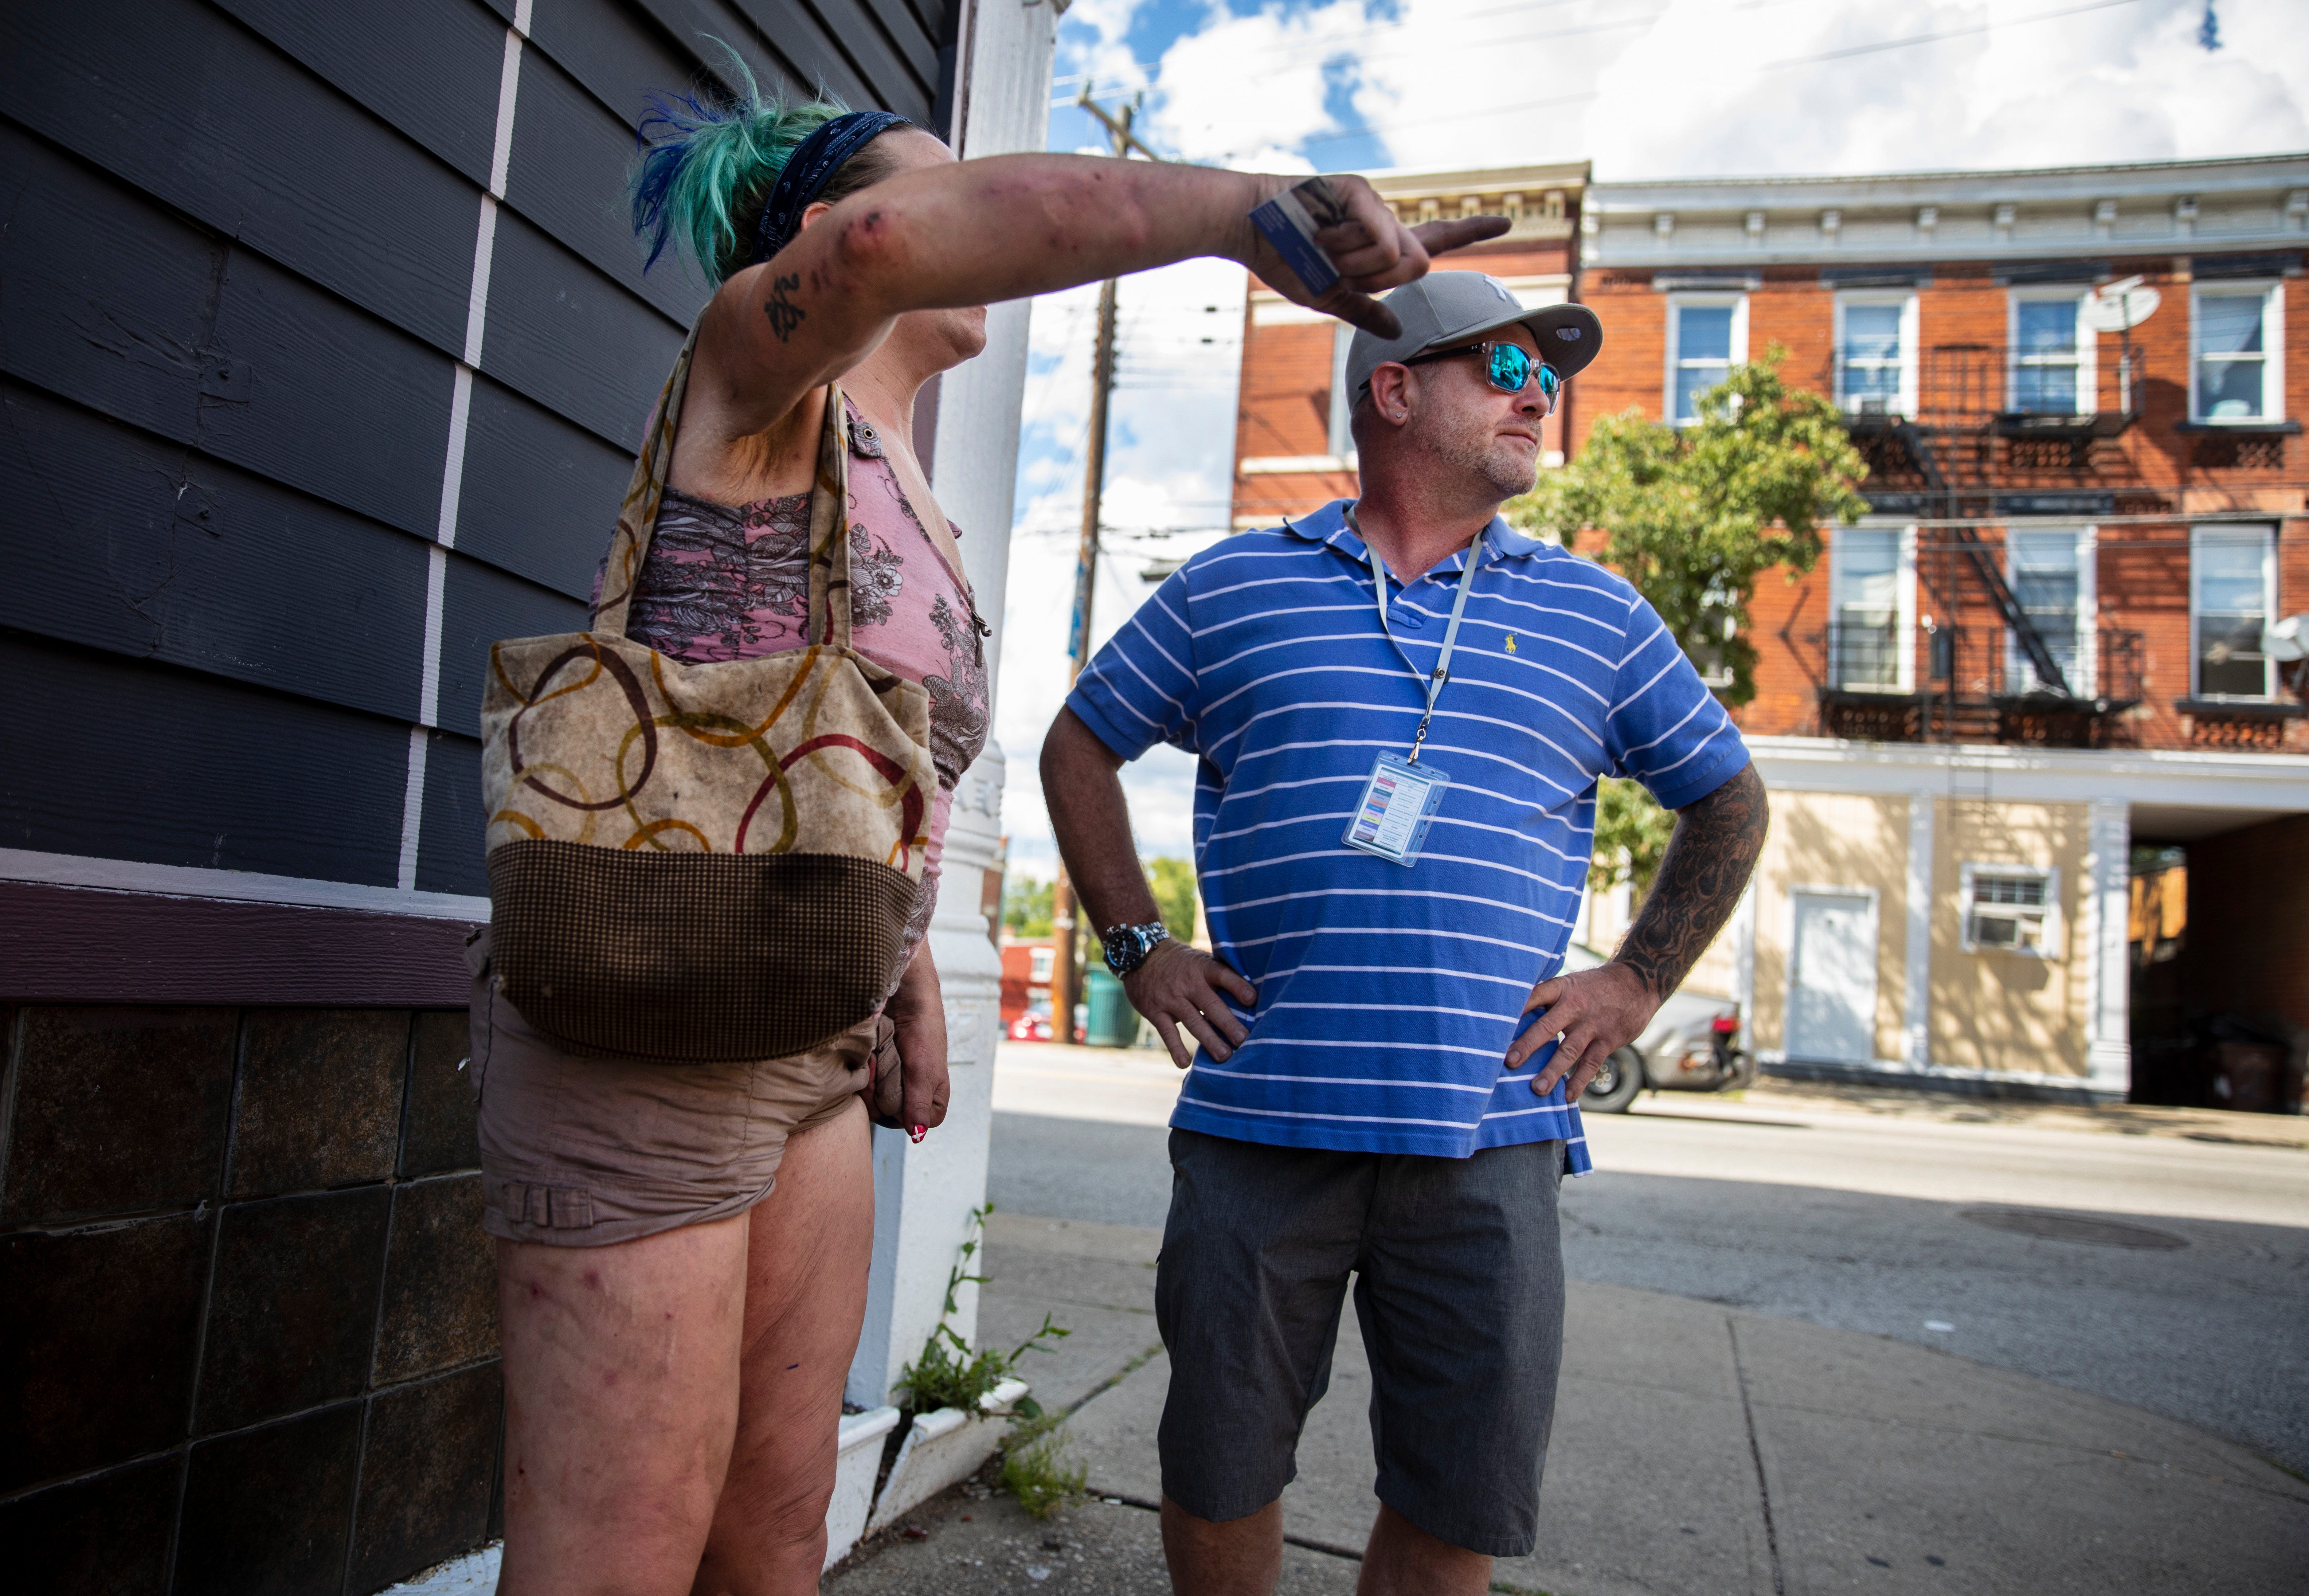 Outreach worker Tony Wilson talks to a woman on Warsaw Street. He gave her a card with resource numbers on it, in case she wanted to reach out to him later for help.